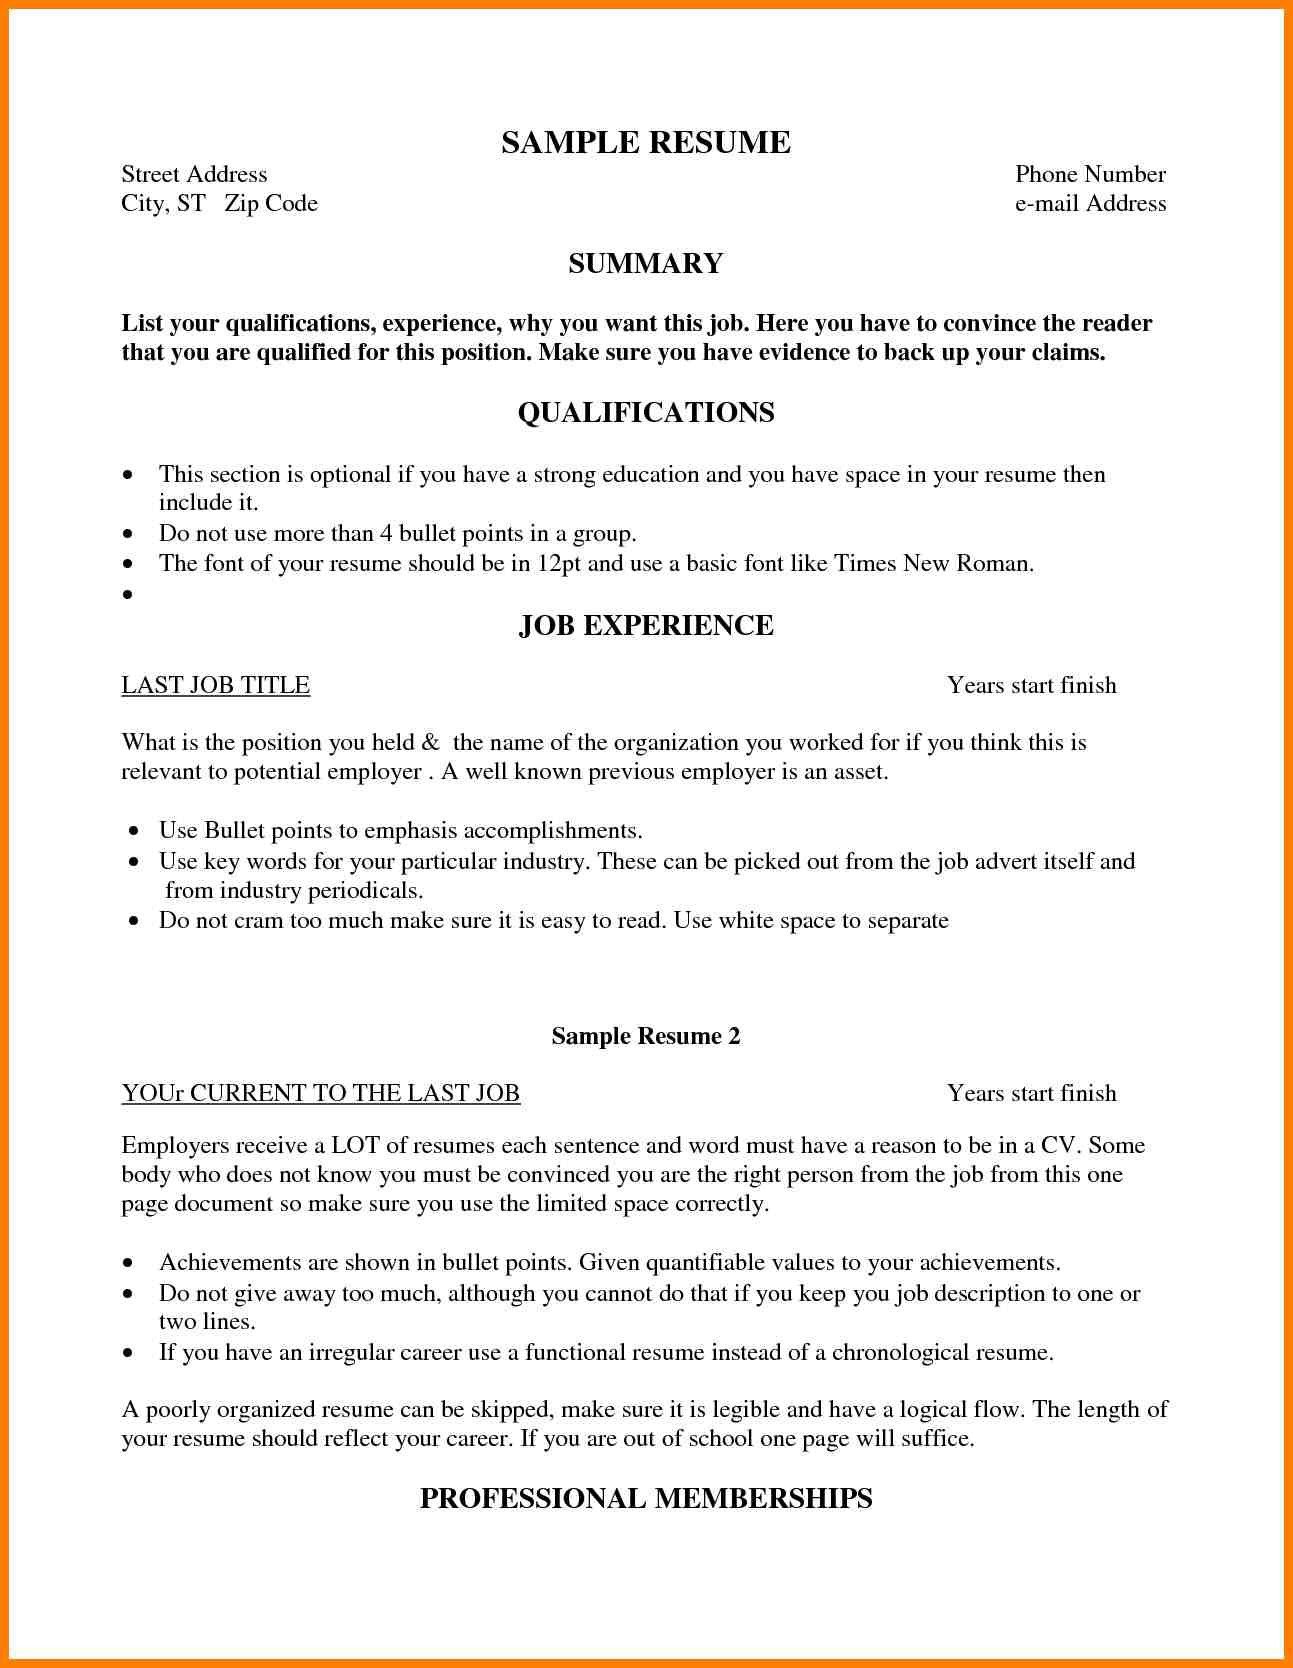 12 education section on resume